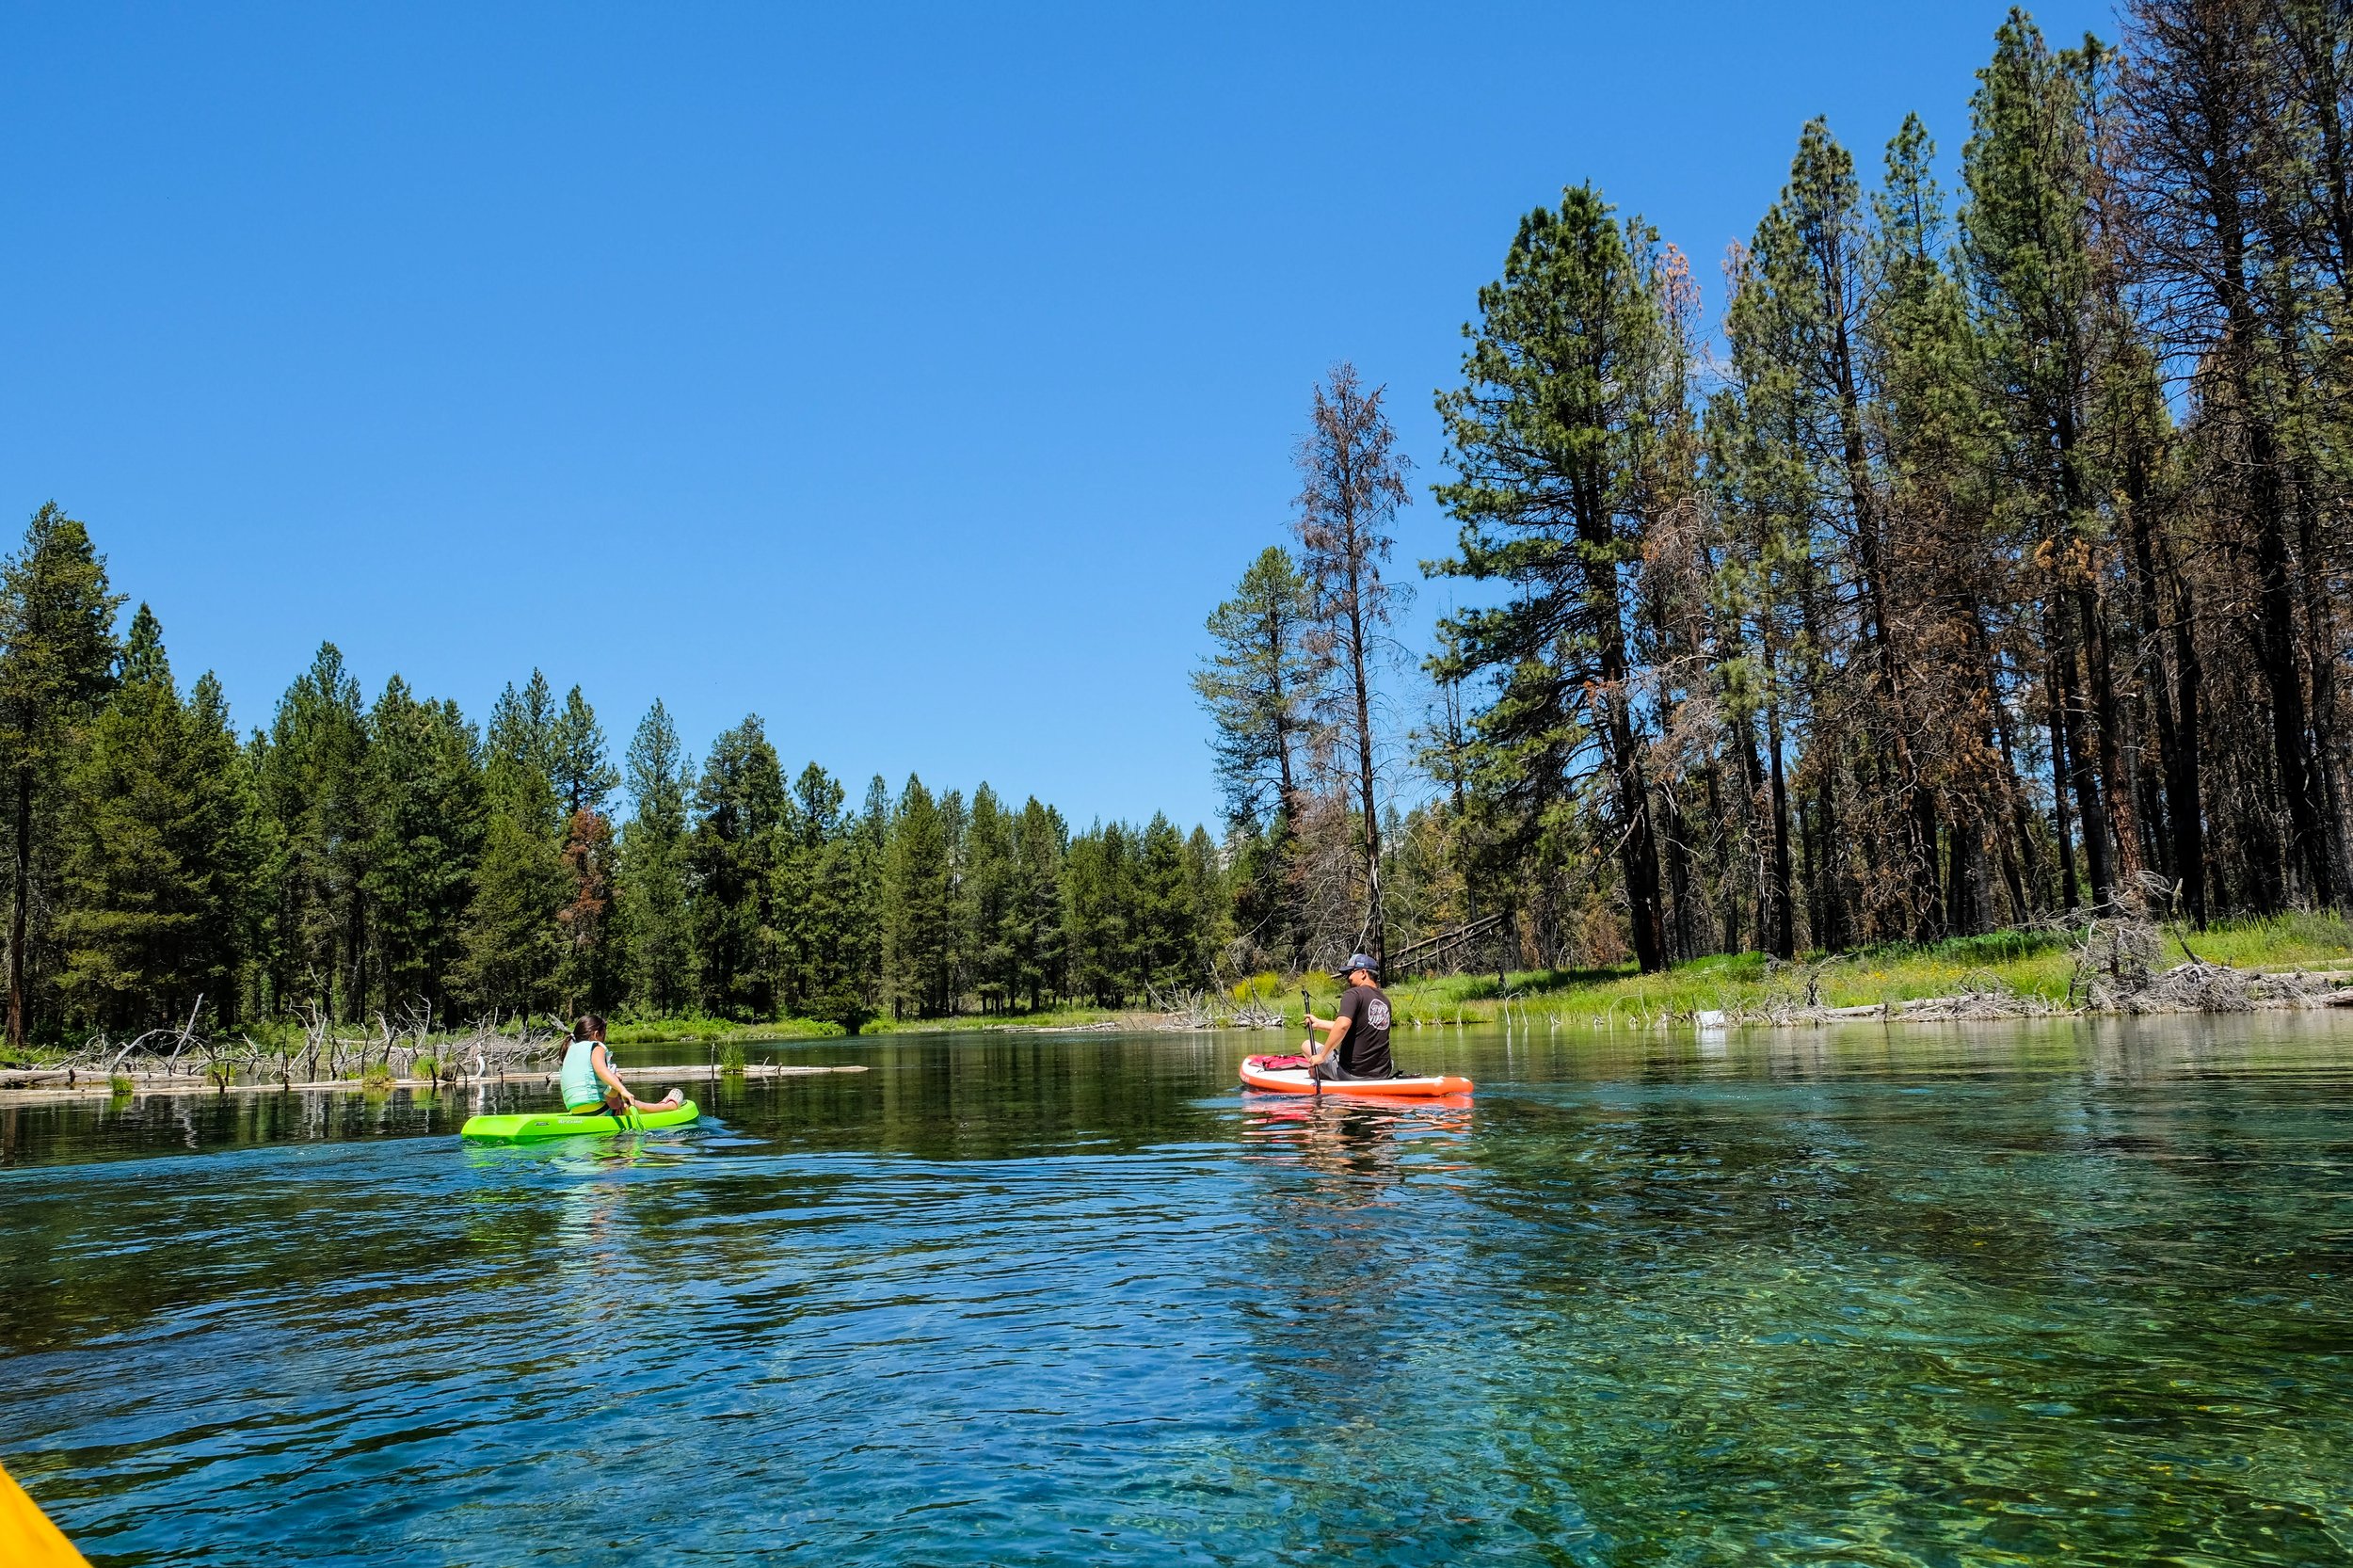 Paddling Spring Creek in Chiloquin - Klamath Falls - What to do in Southern Oregon - travel